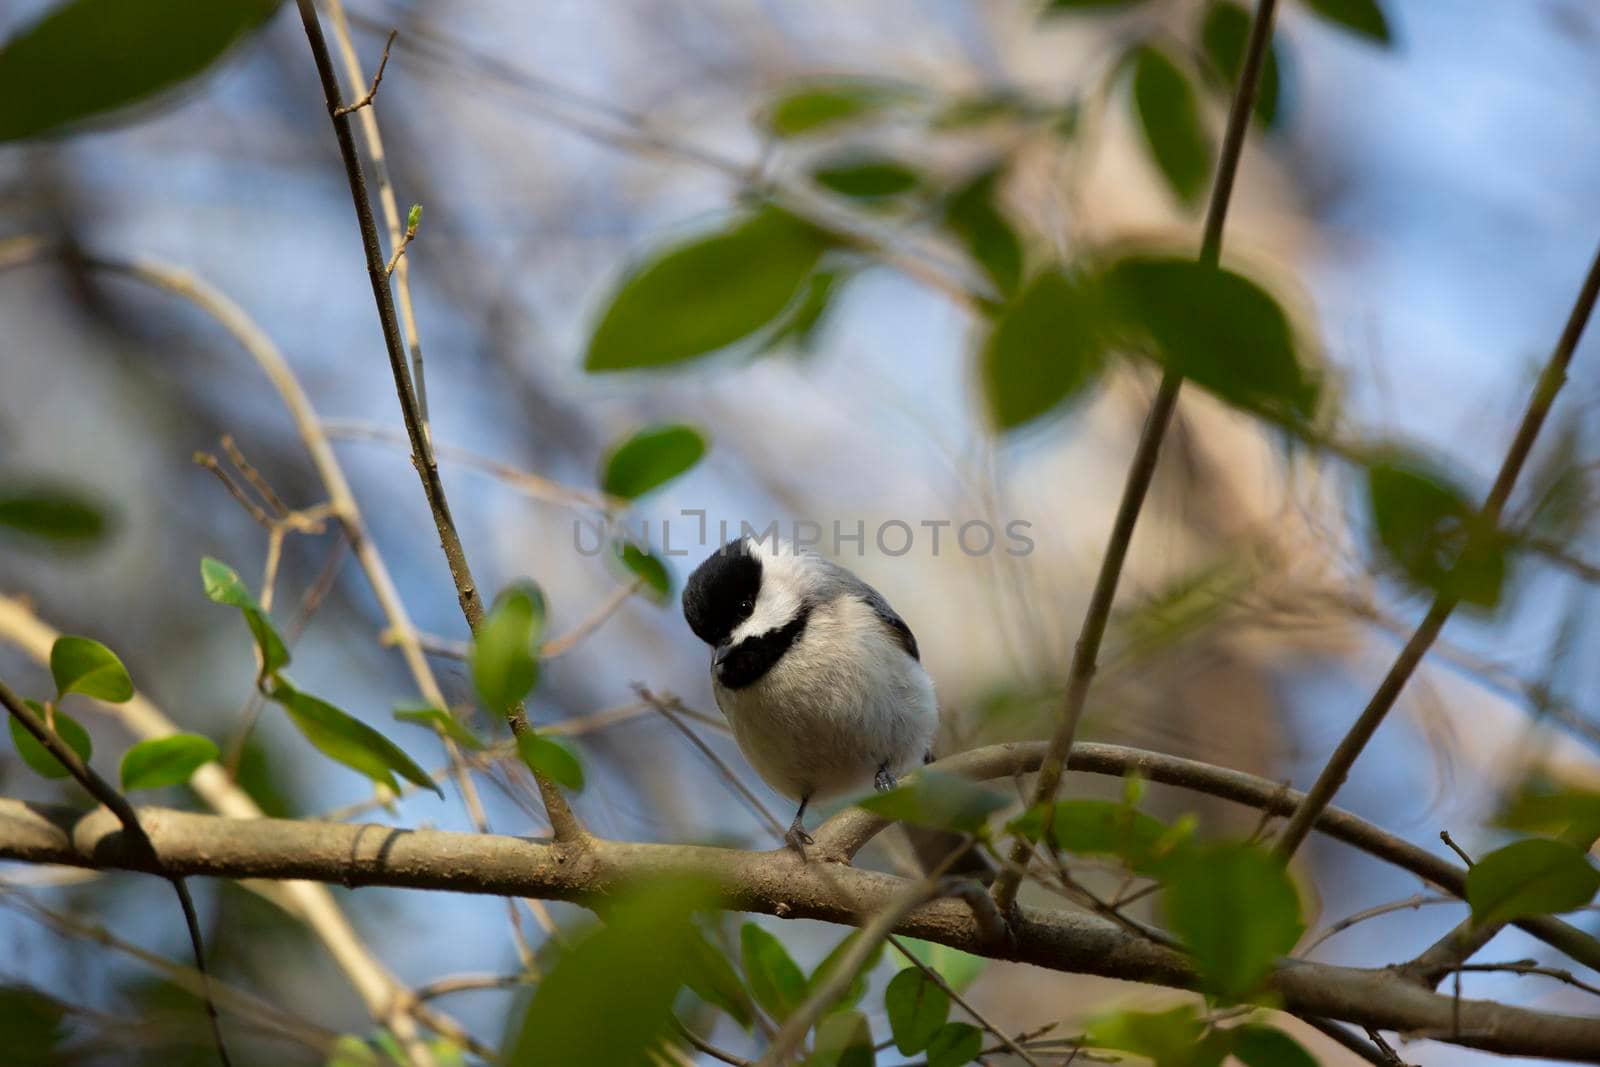 Curious black-capped chickadee (Poecile atricapillus) looking around from its perch on a bush branch